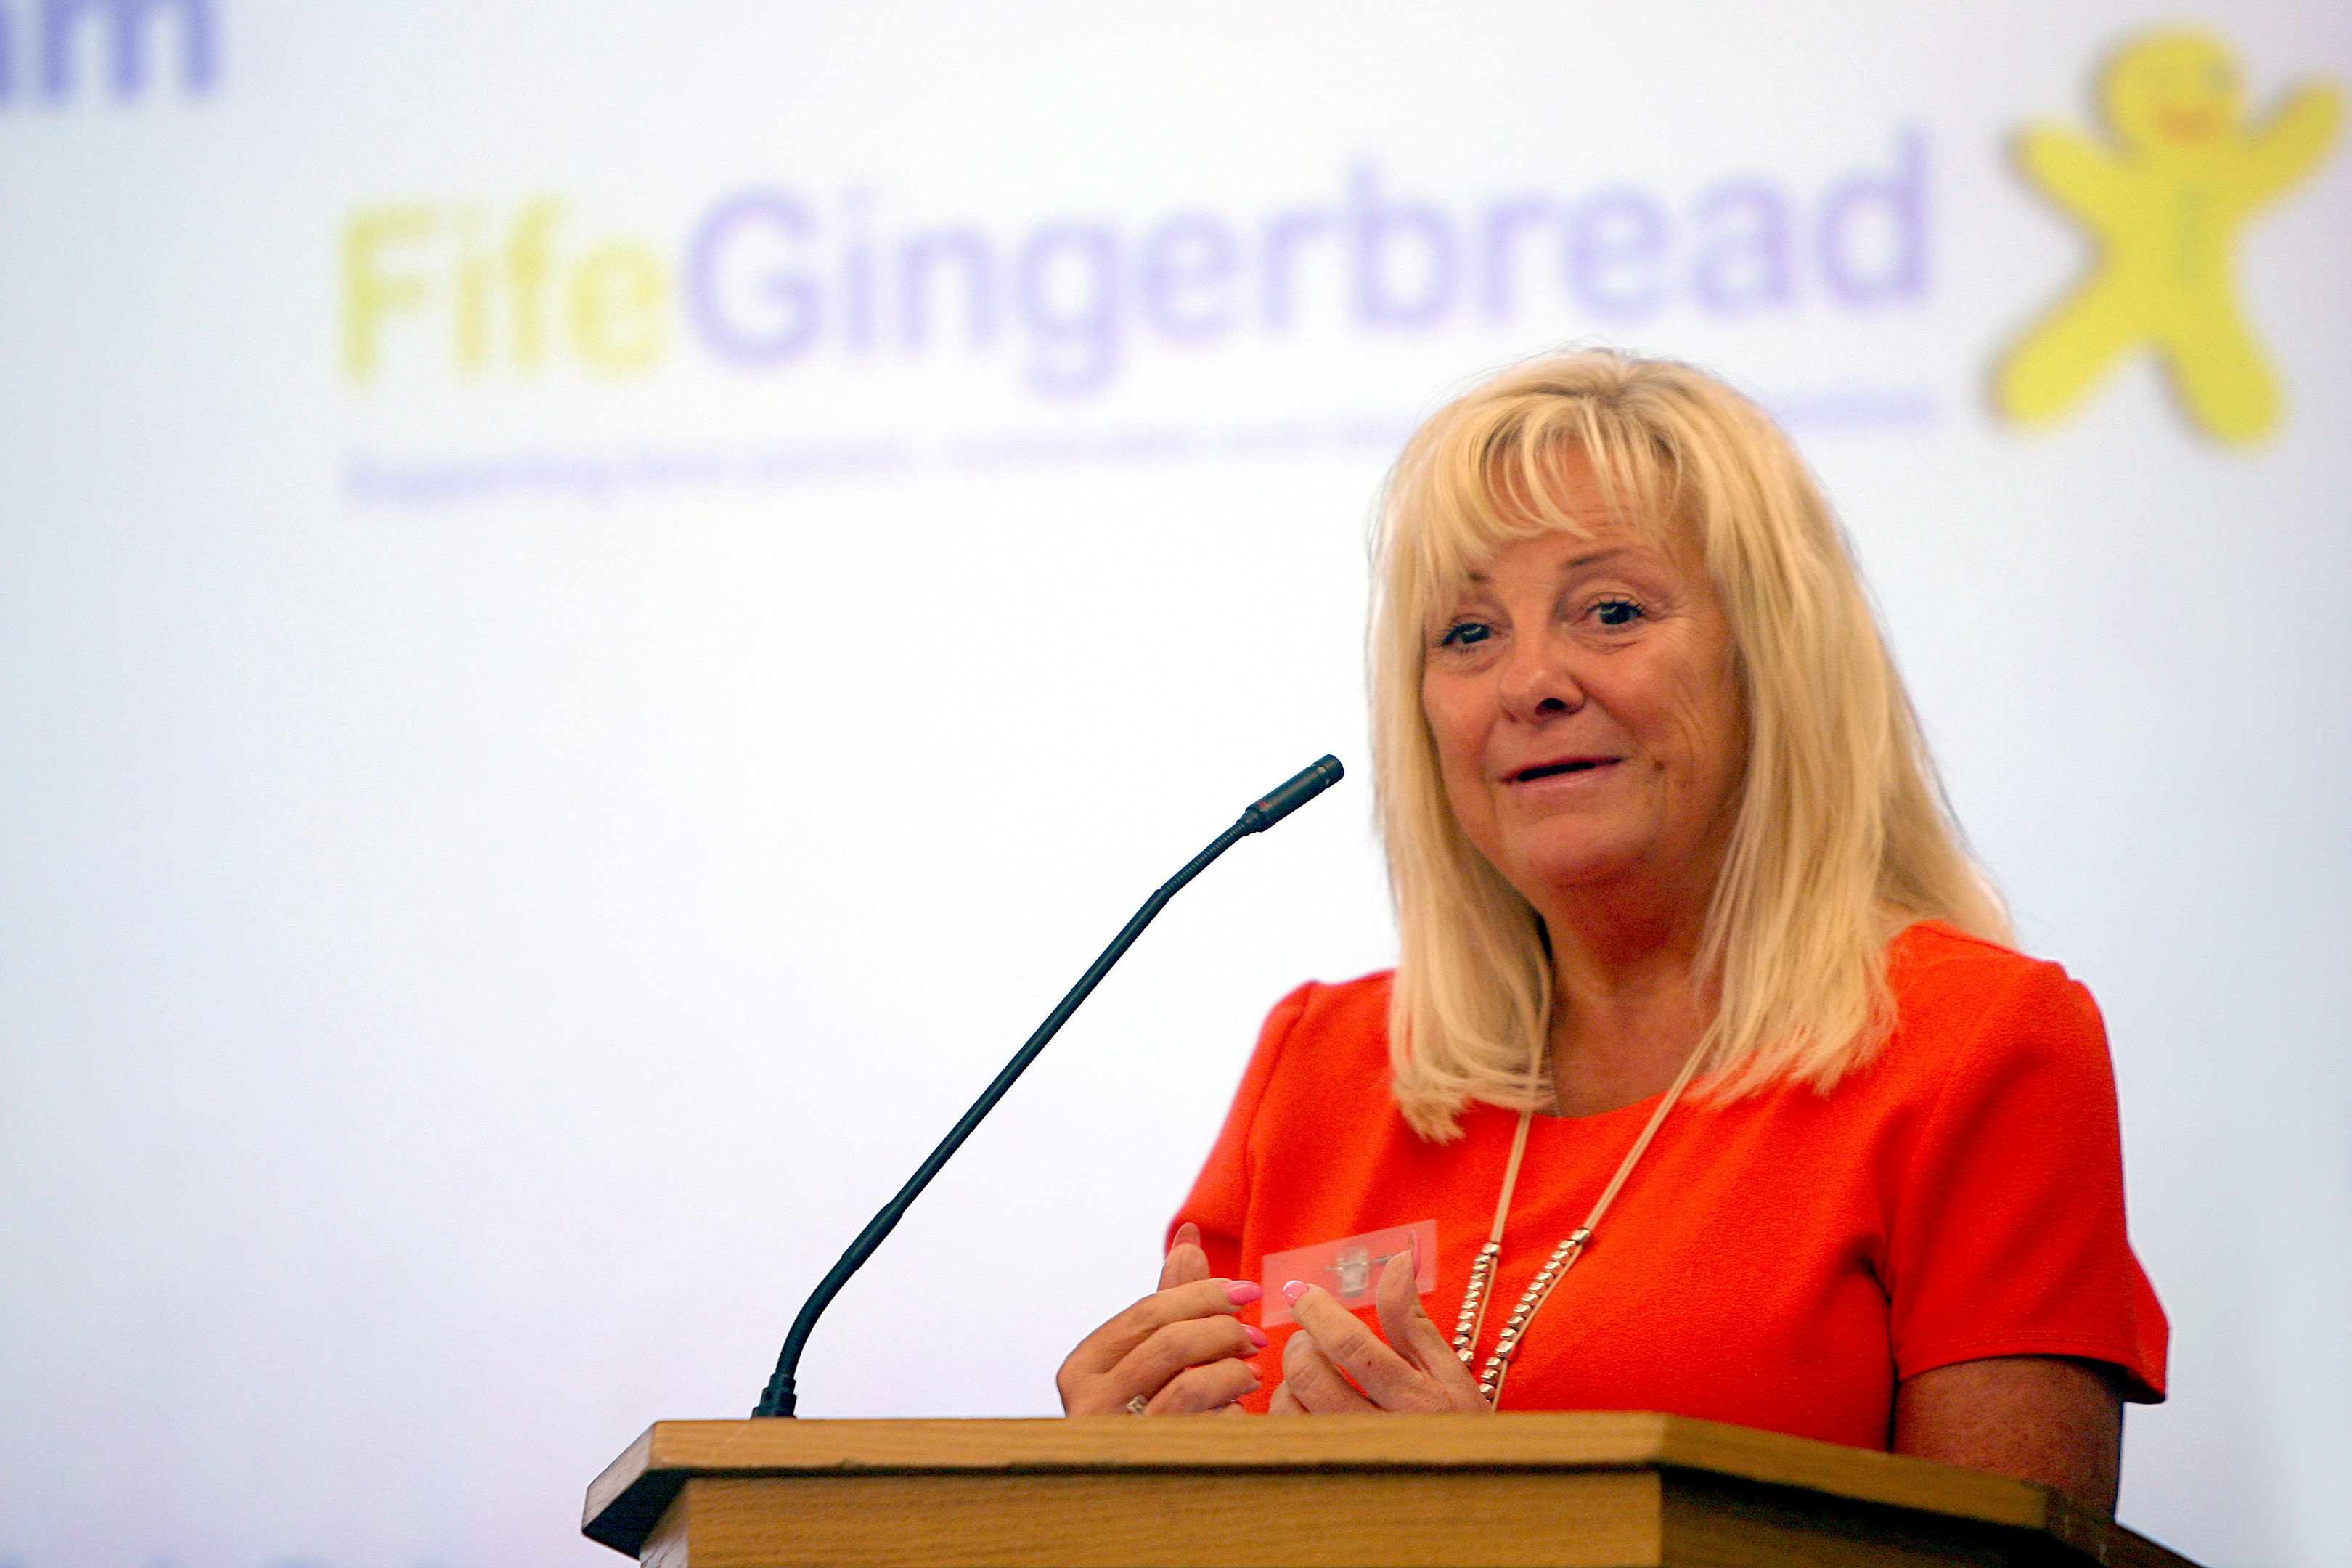 Rhona Cunningham from Fife Gingerbread has expressed her concerns about the current situation.